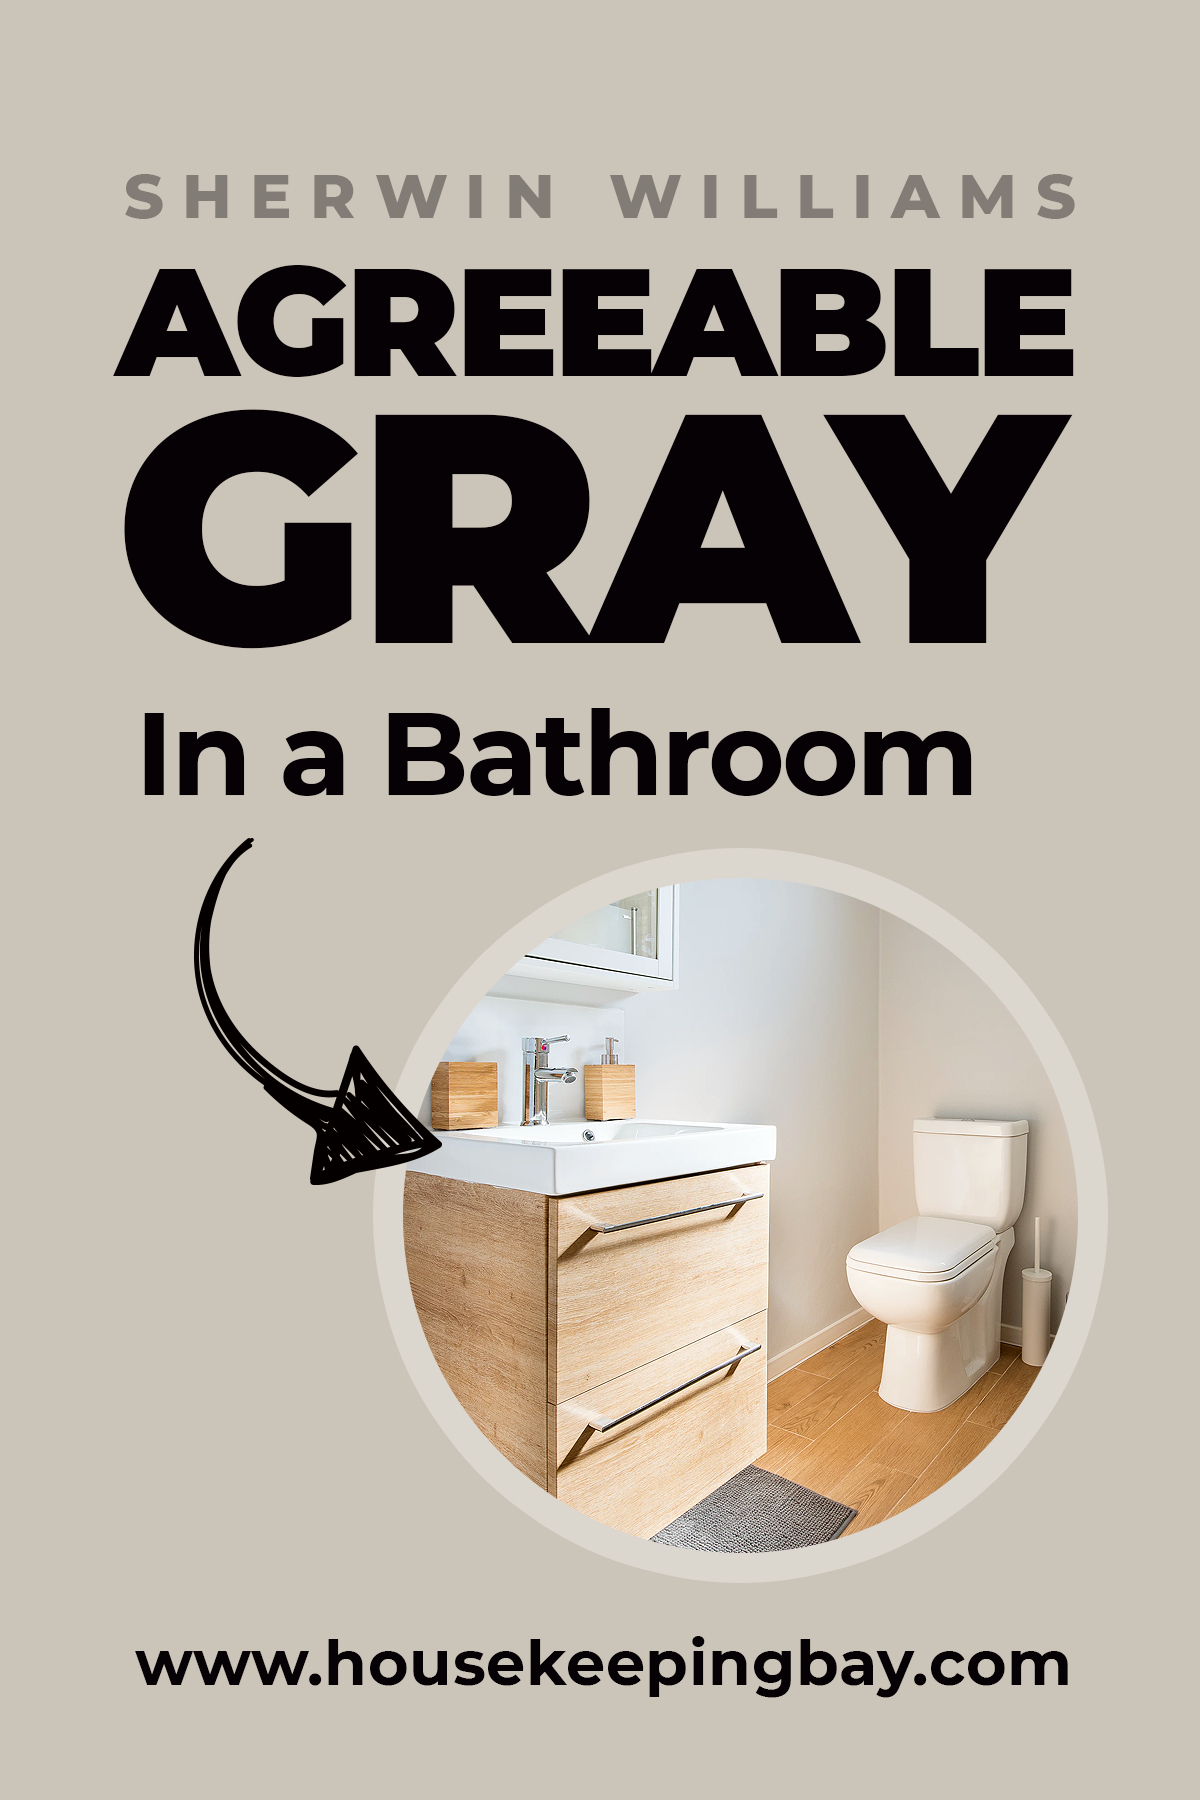 Agreeable Gray in a Bathroom